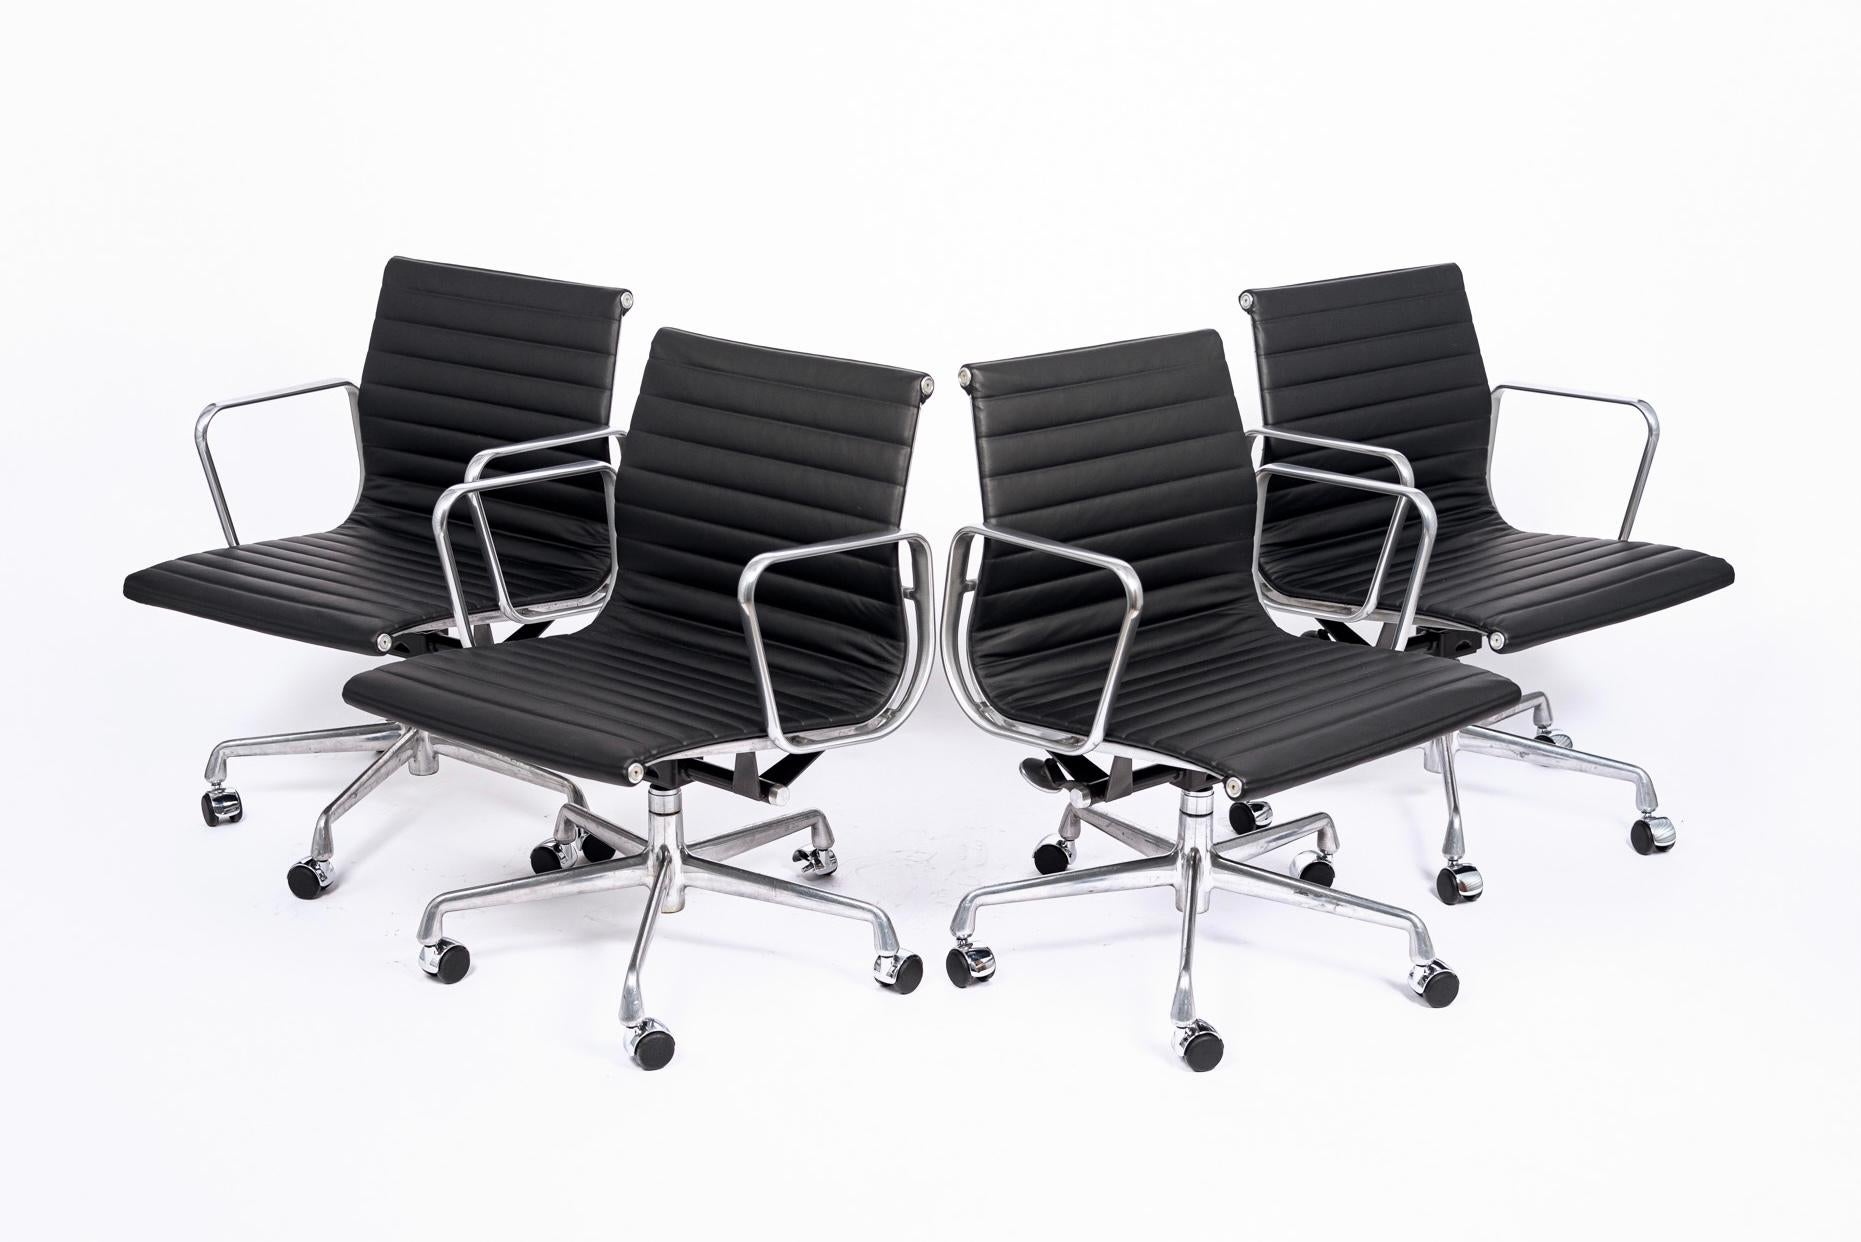 These Aluminum Group Management height office chairs designed by Charles & Ray Eames for Herman Miller are from the Eames Aluminum Group Collection. These distinctive chairs resulted from the Eames' experimentation with aluminum, which became more